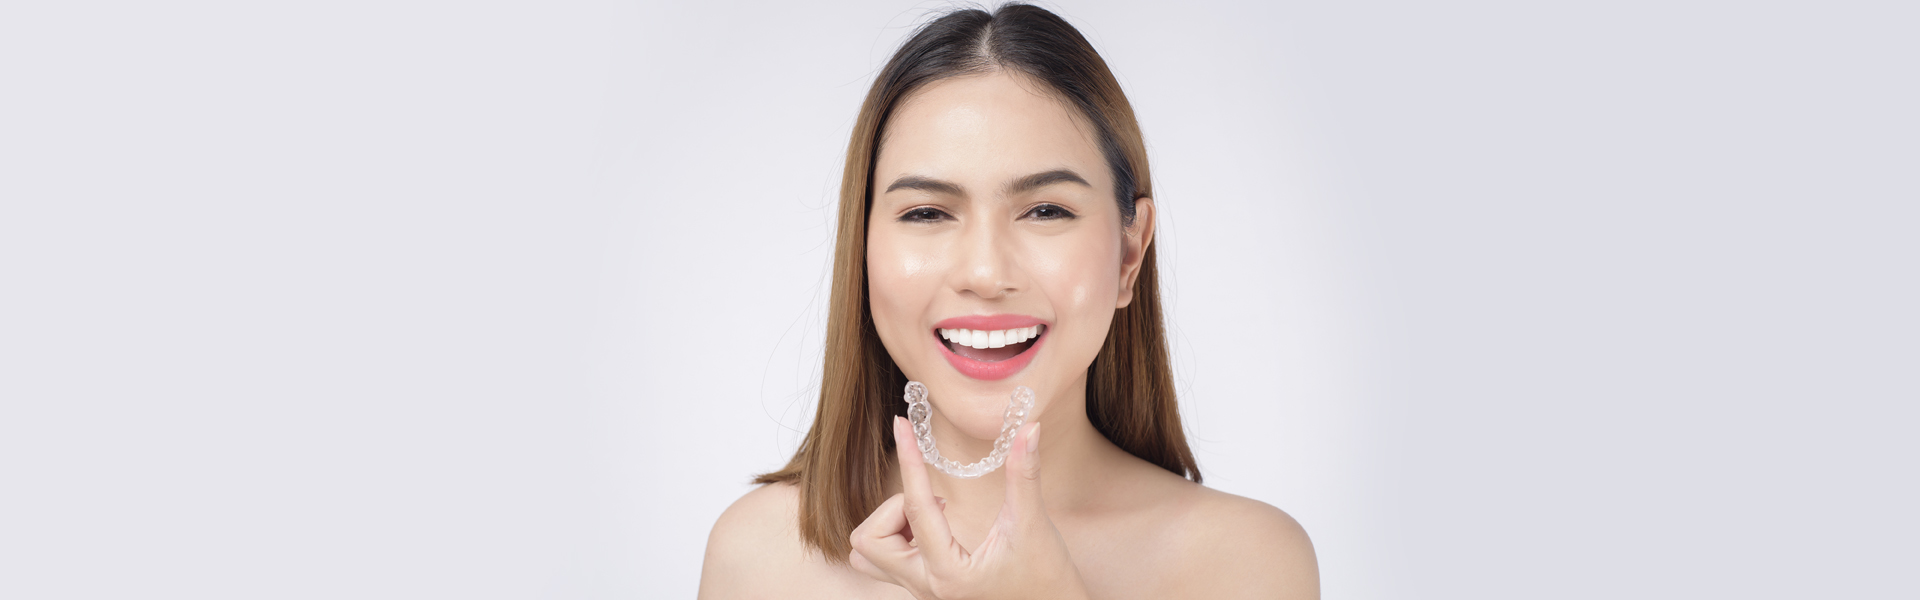 Fixing Buck Teeth With Invisalign®️: King George Dental Centre